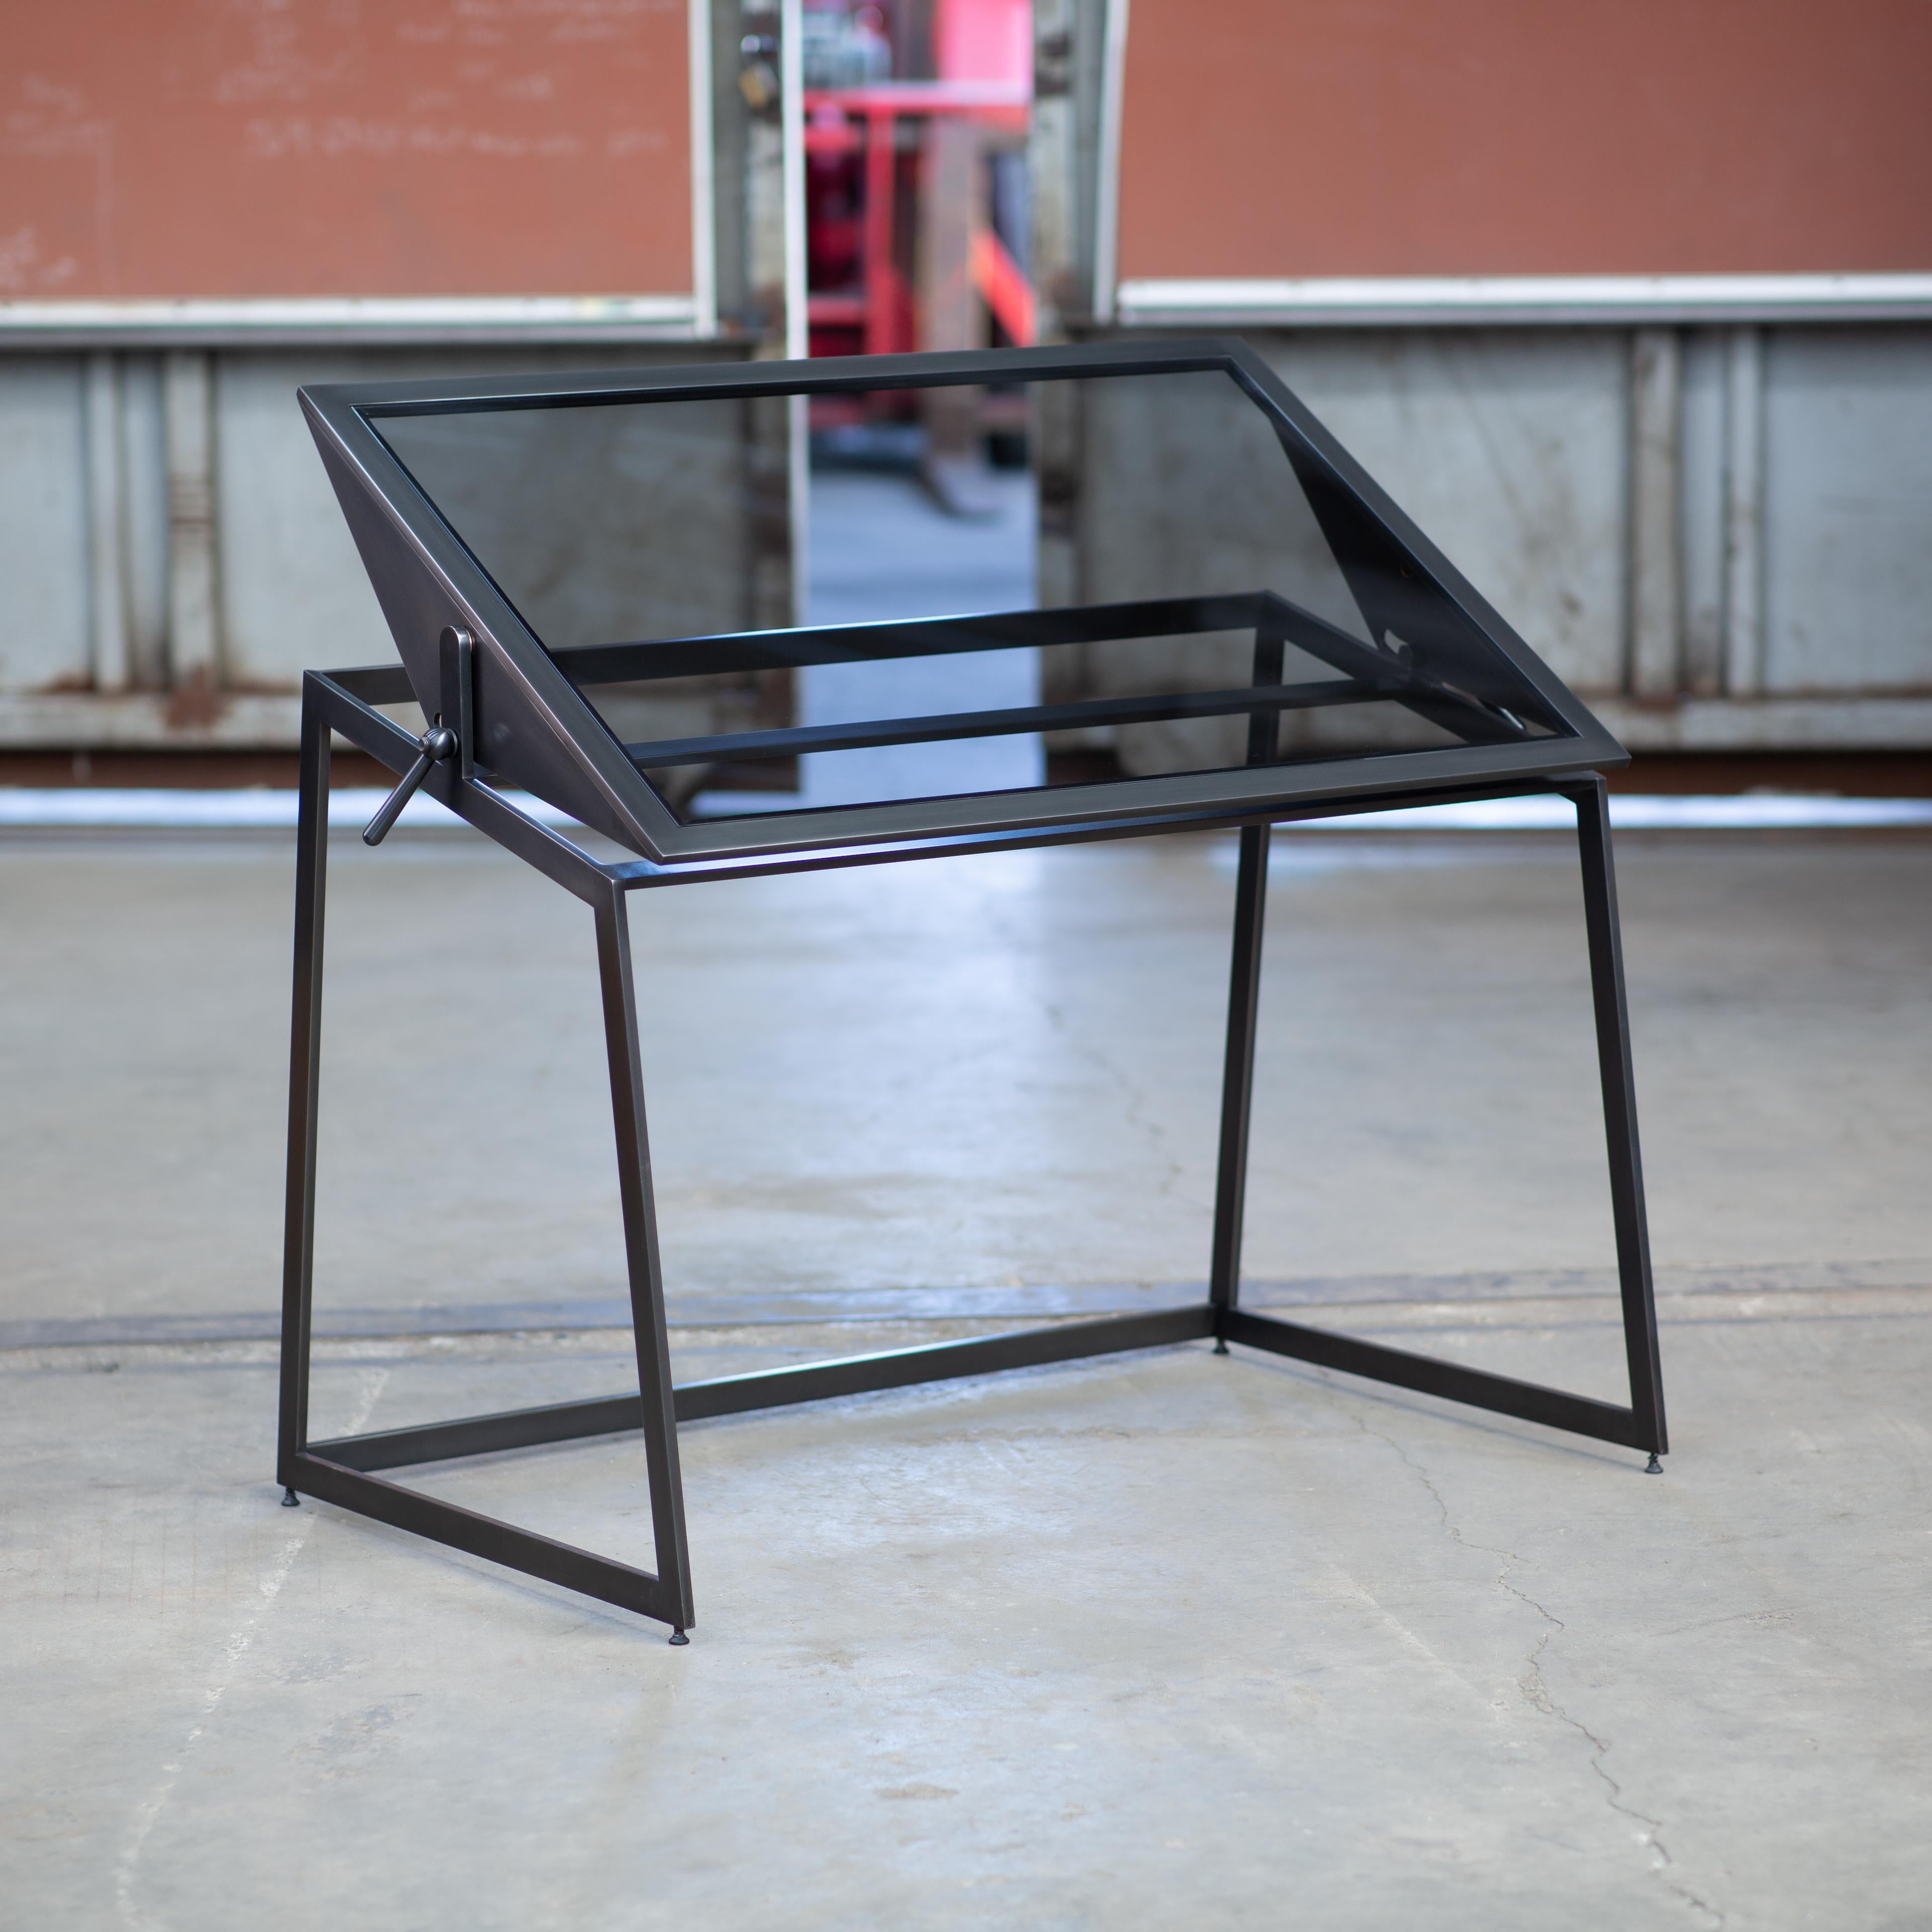 Modern Pivoting Drafting Table, Blackened Steel and Smoked Glass, by Force/Collide For Sale